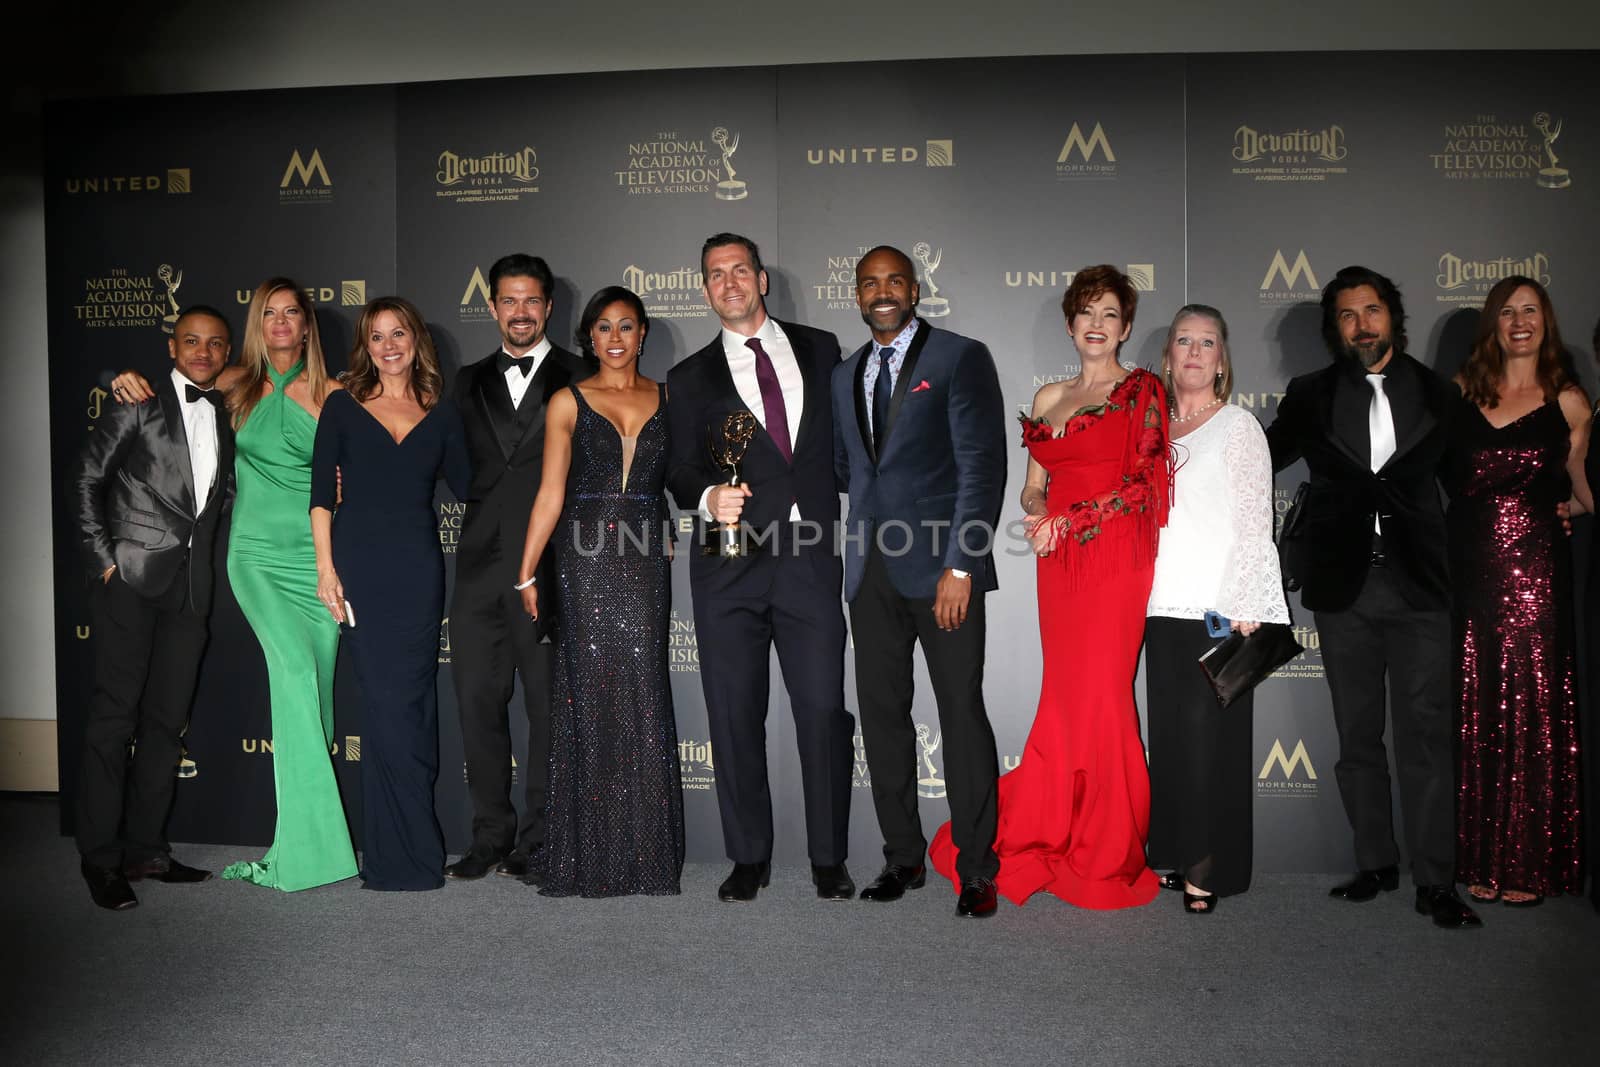 Frank Valentini, General Hospital Cast, Outstanding Drama Series, General Hospital
at the 44th Daytime Emmy Awards - Press Room, Pasadena Civic Auditorium, Pasadena, CA 04-30-17/ImageCollect by ImageCollect